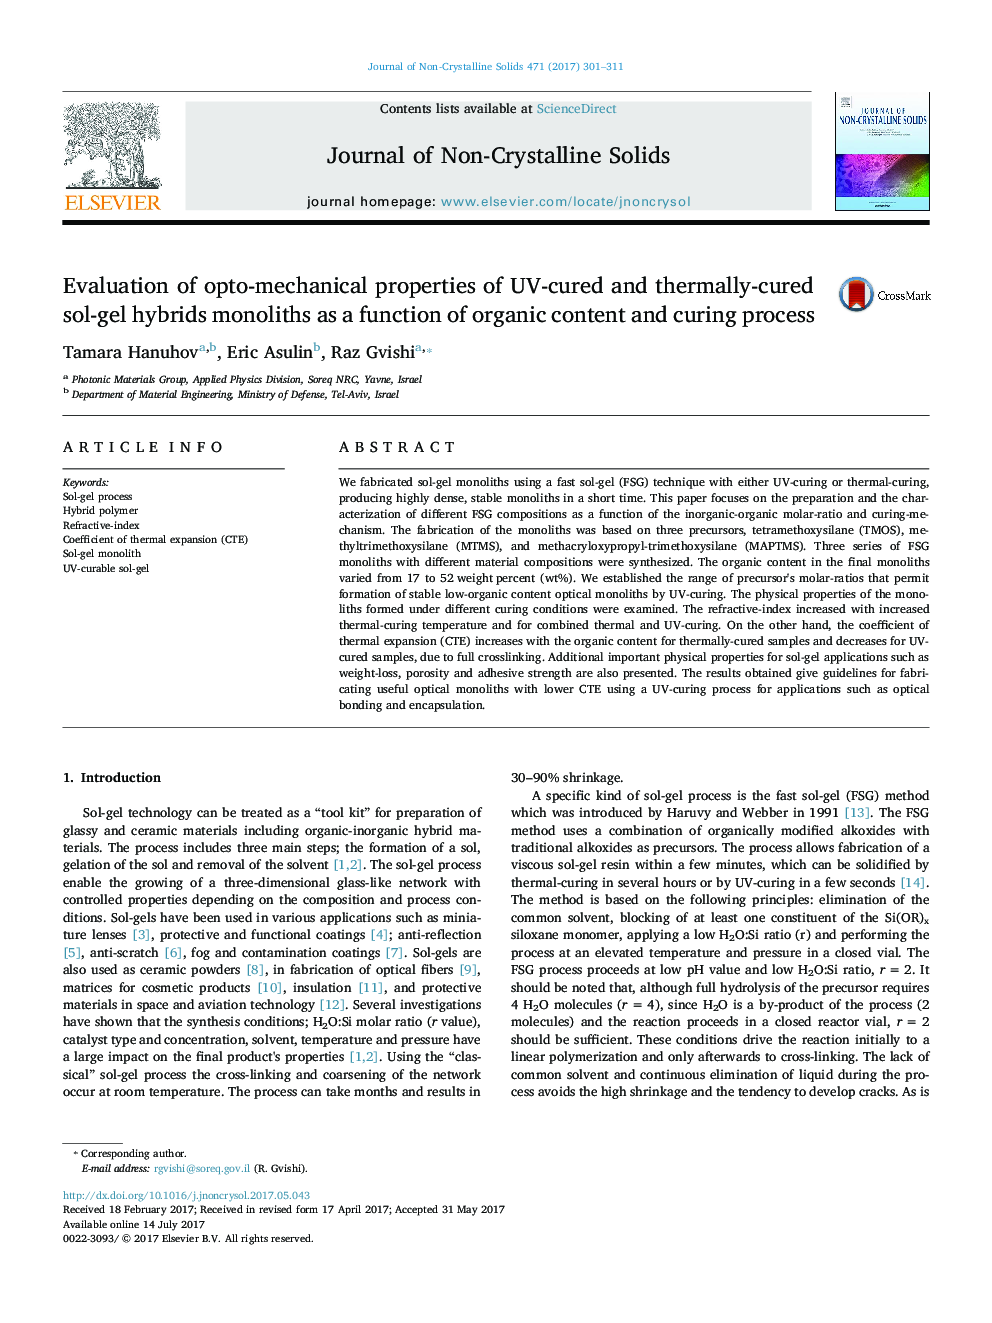 Evaluation of opto-mechanical properties of UV-cured and thermally-cured sol-gel hybrids monoliths as a function of organic content and curing process